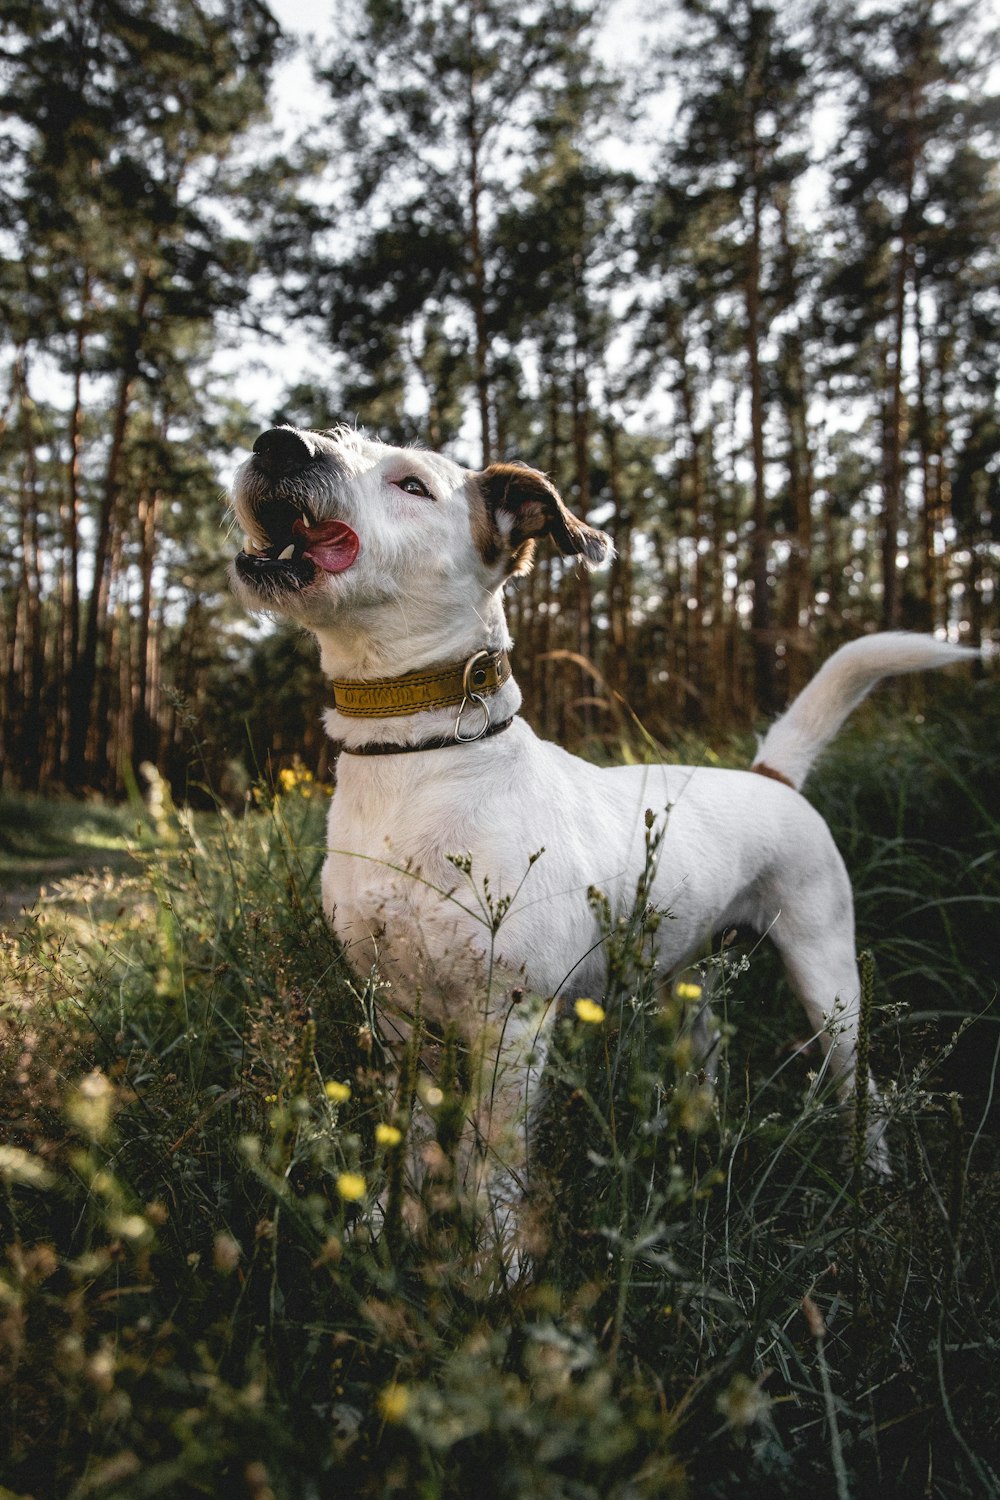 Avenue Victor plast Dog In Nature Pictures | Download Free Images on Unsplash